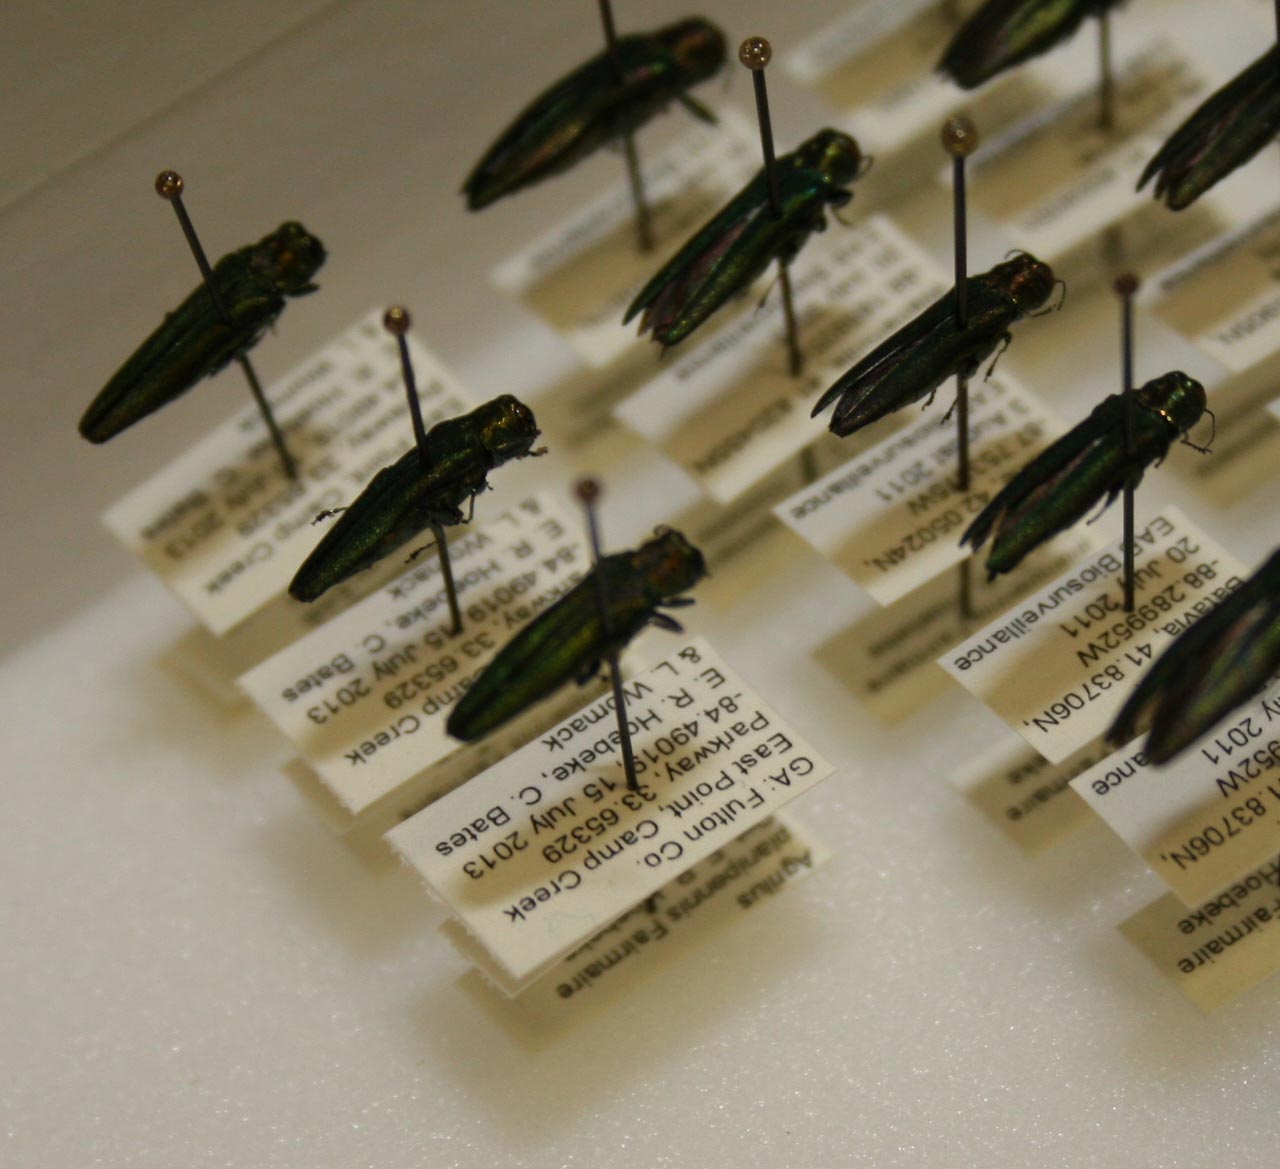 Close up of emerald ash borers in the Georgia Natural History Museum.